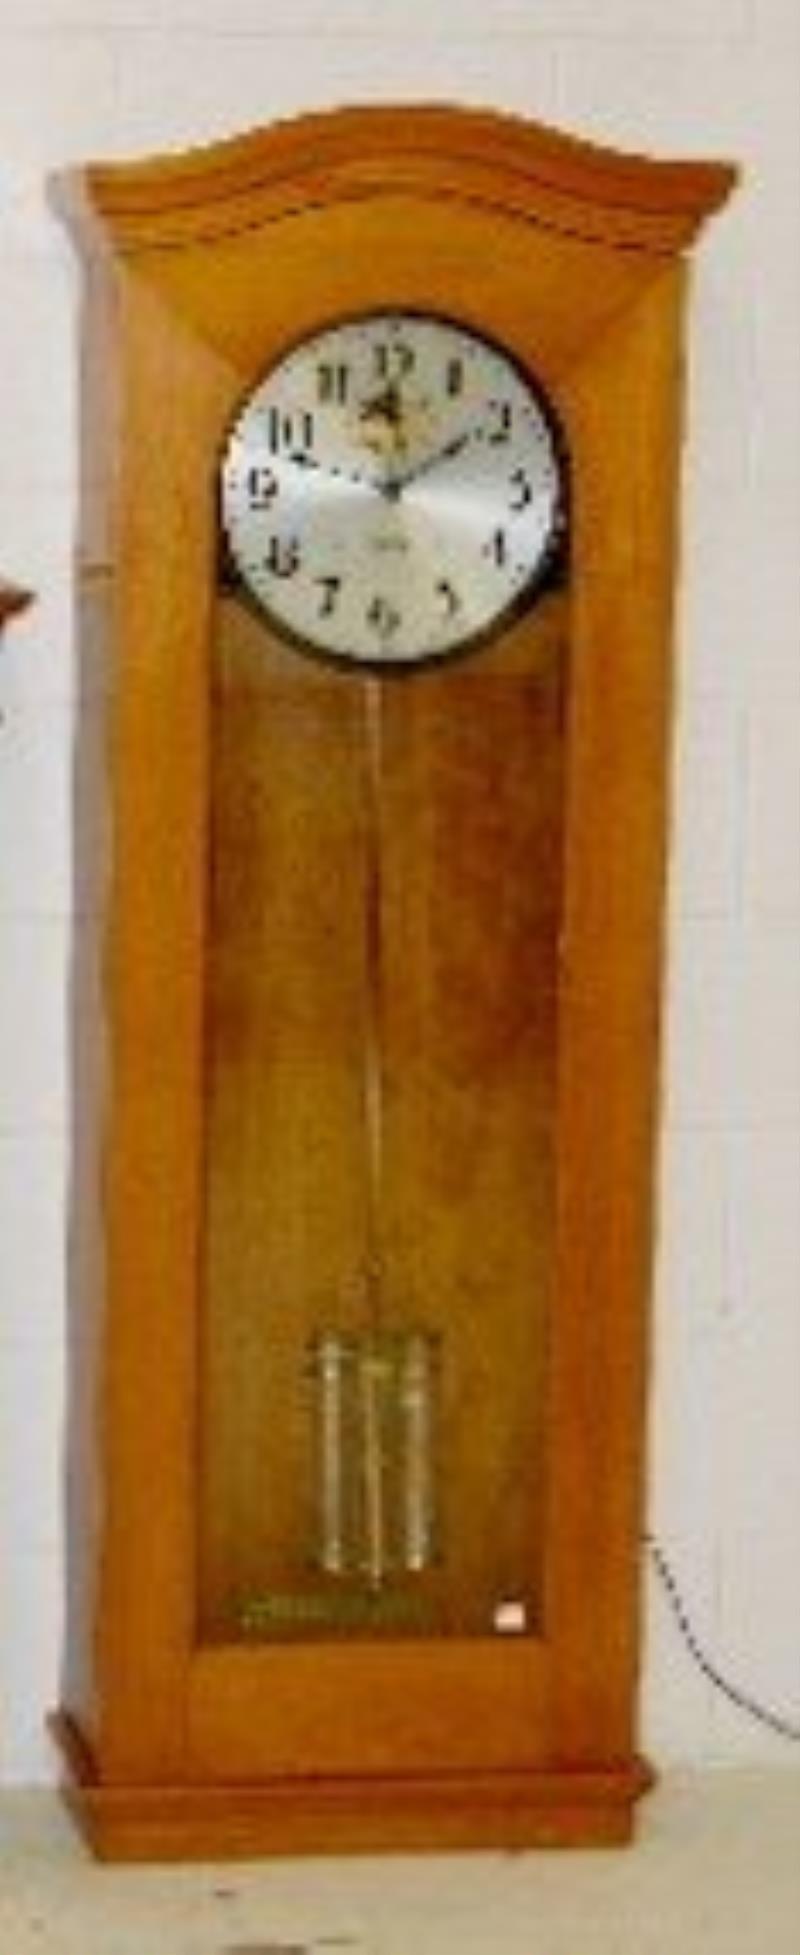 Standard Electric Time Co. Wall Clock